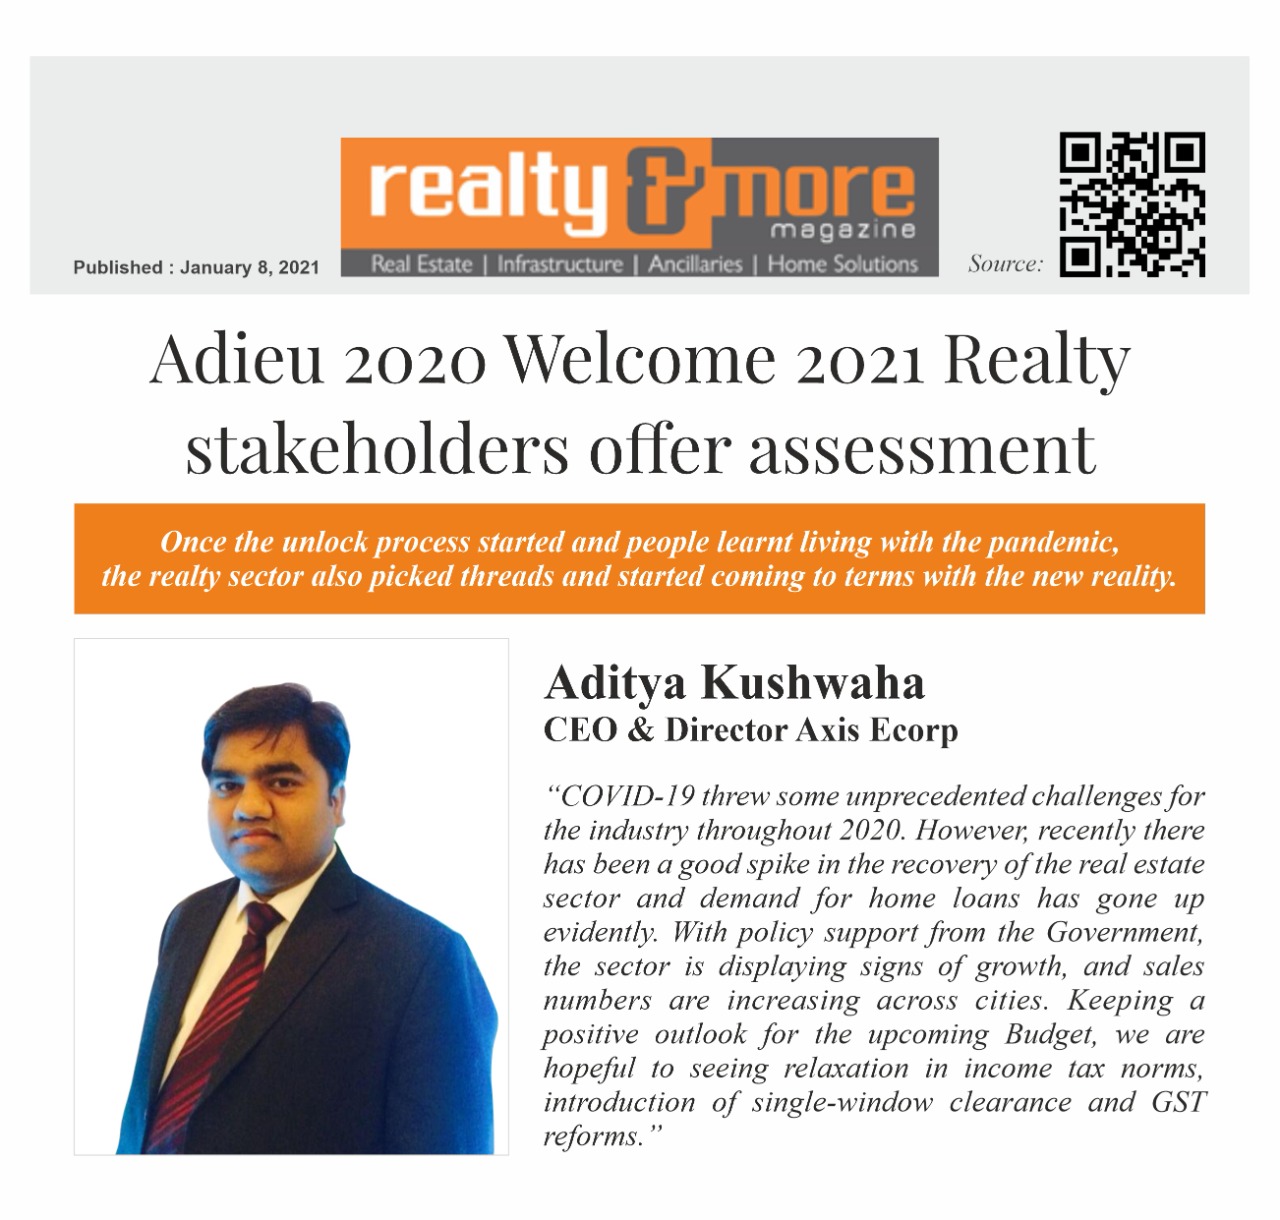 Adieu 2020 Welcome 2021 Realty stakeholders